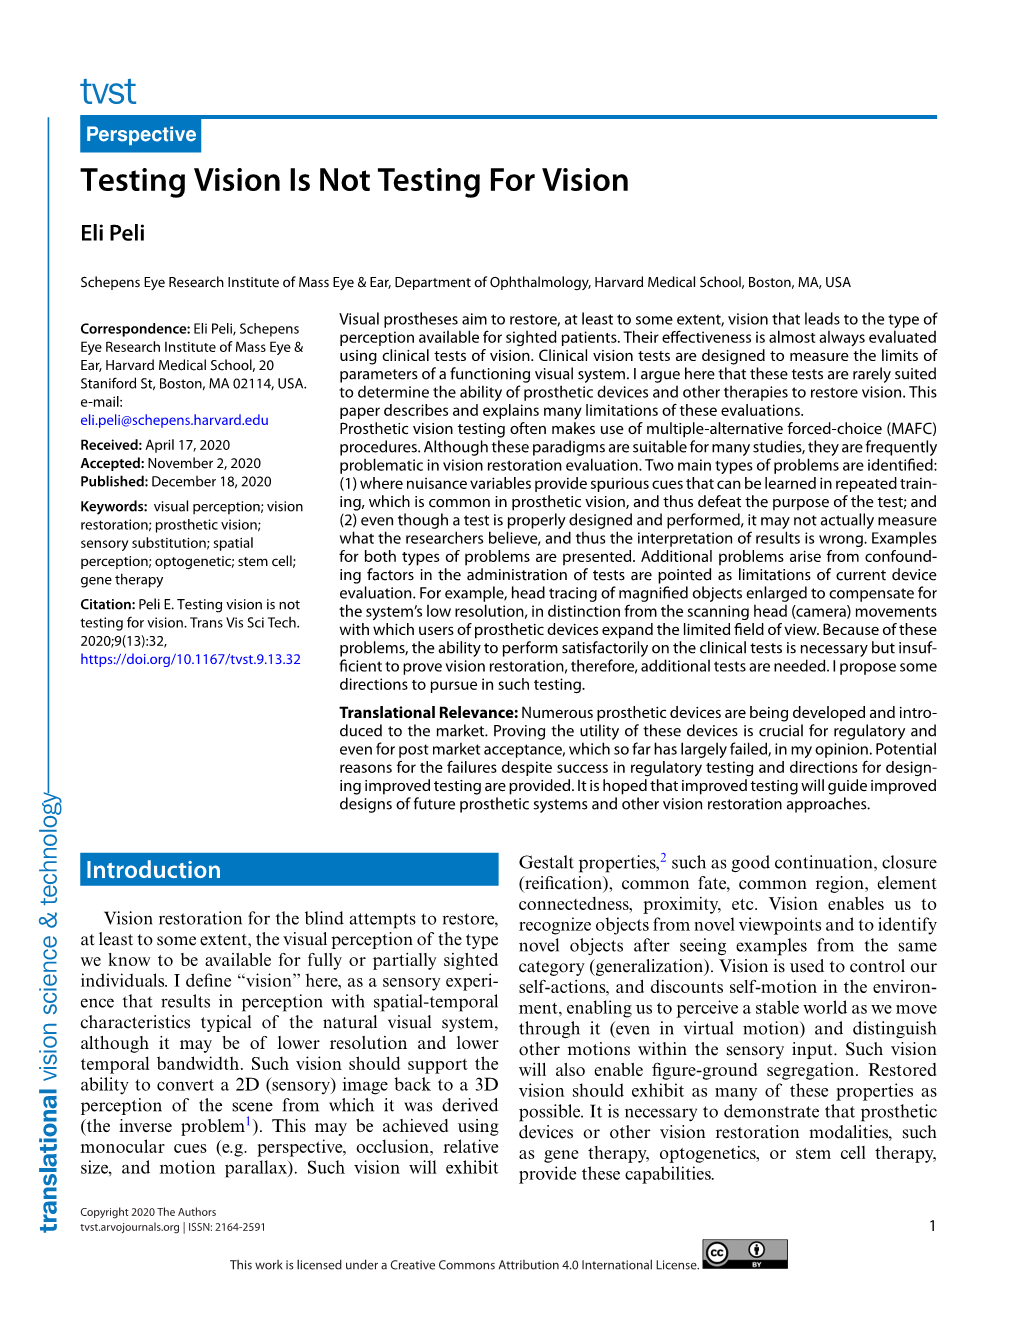 Testing Vision Is Not Testing for Vision